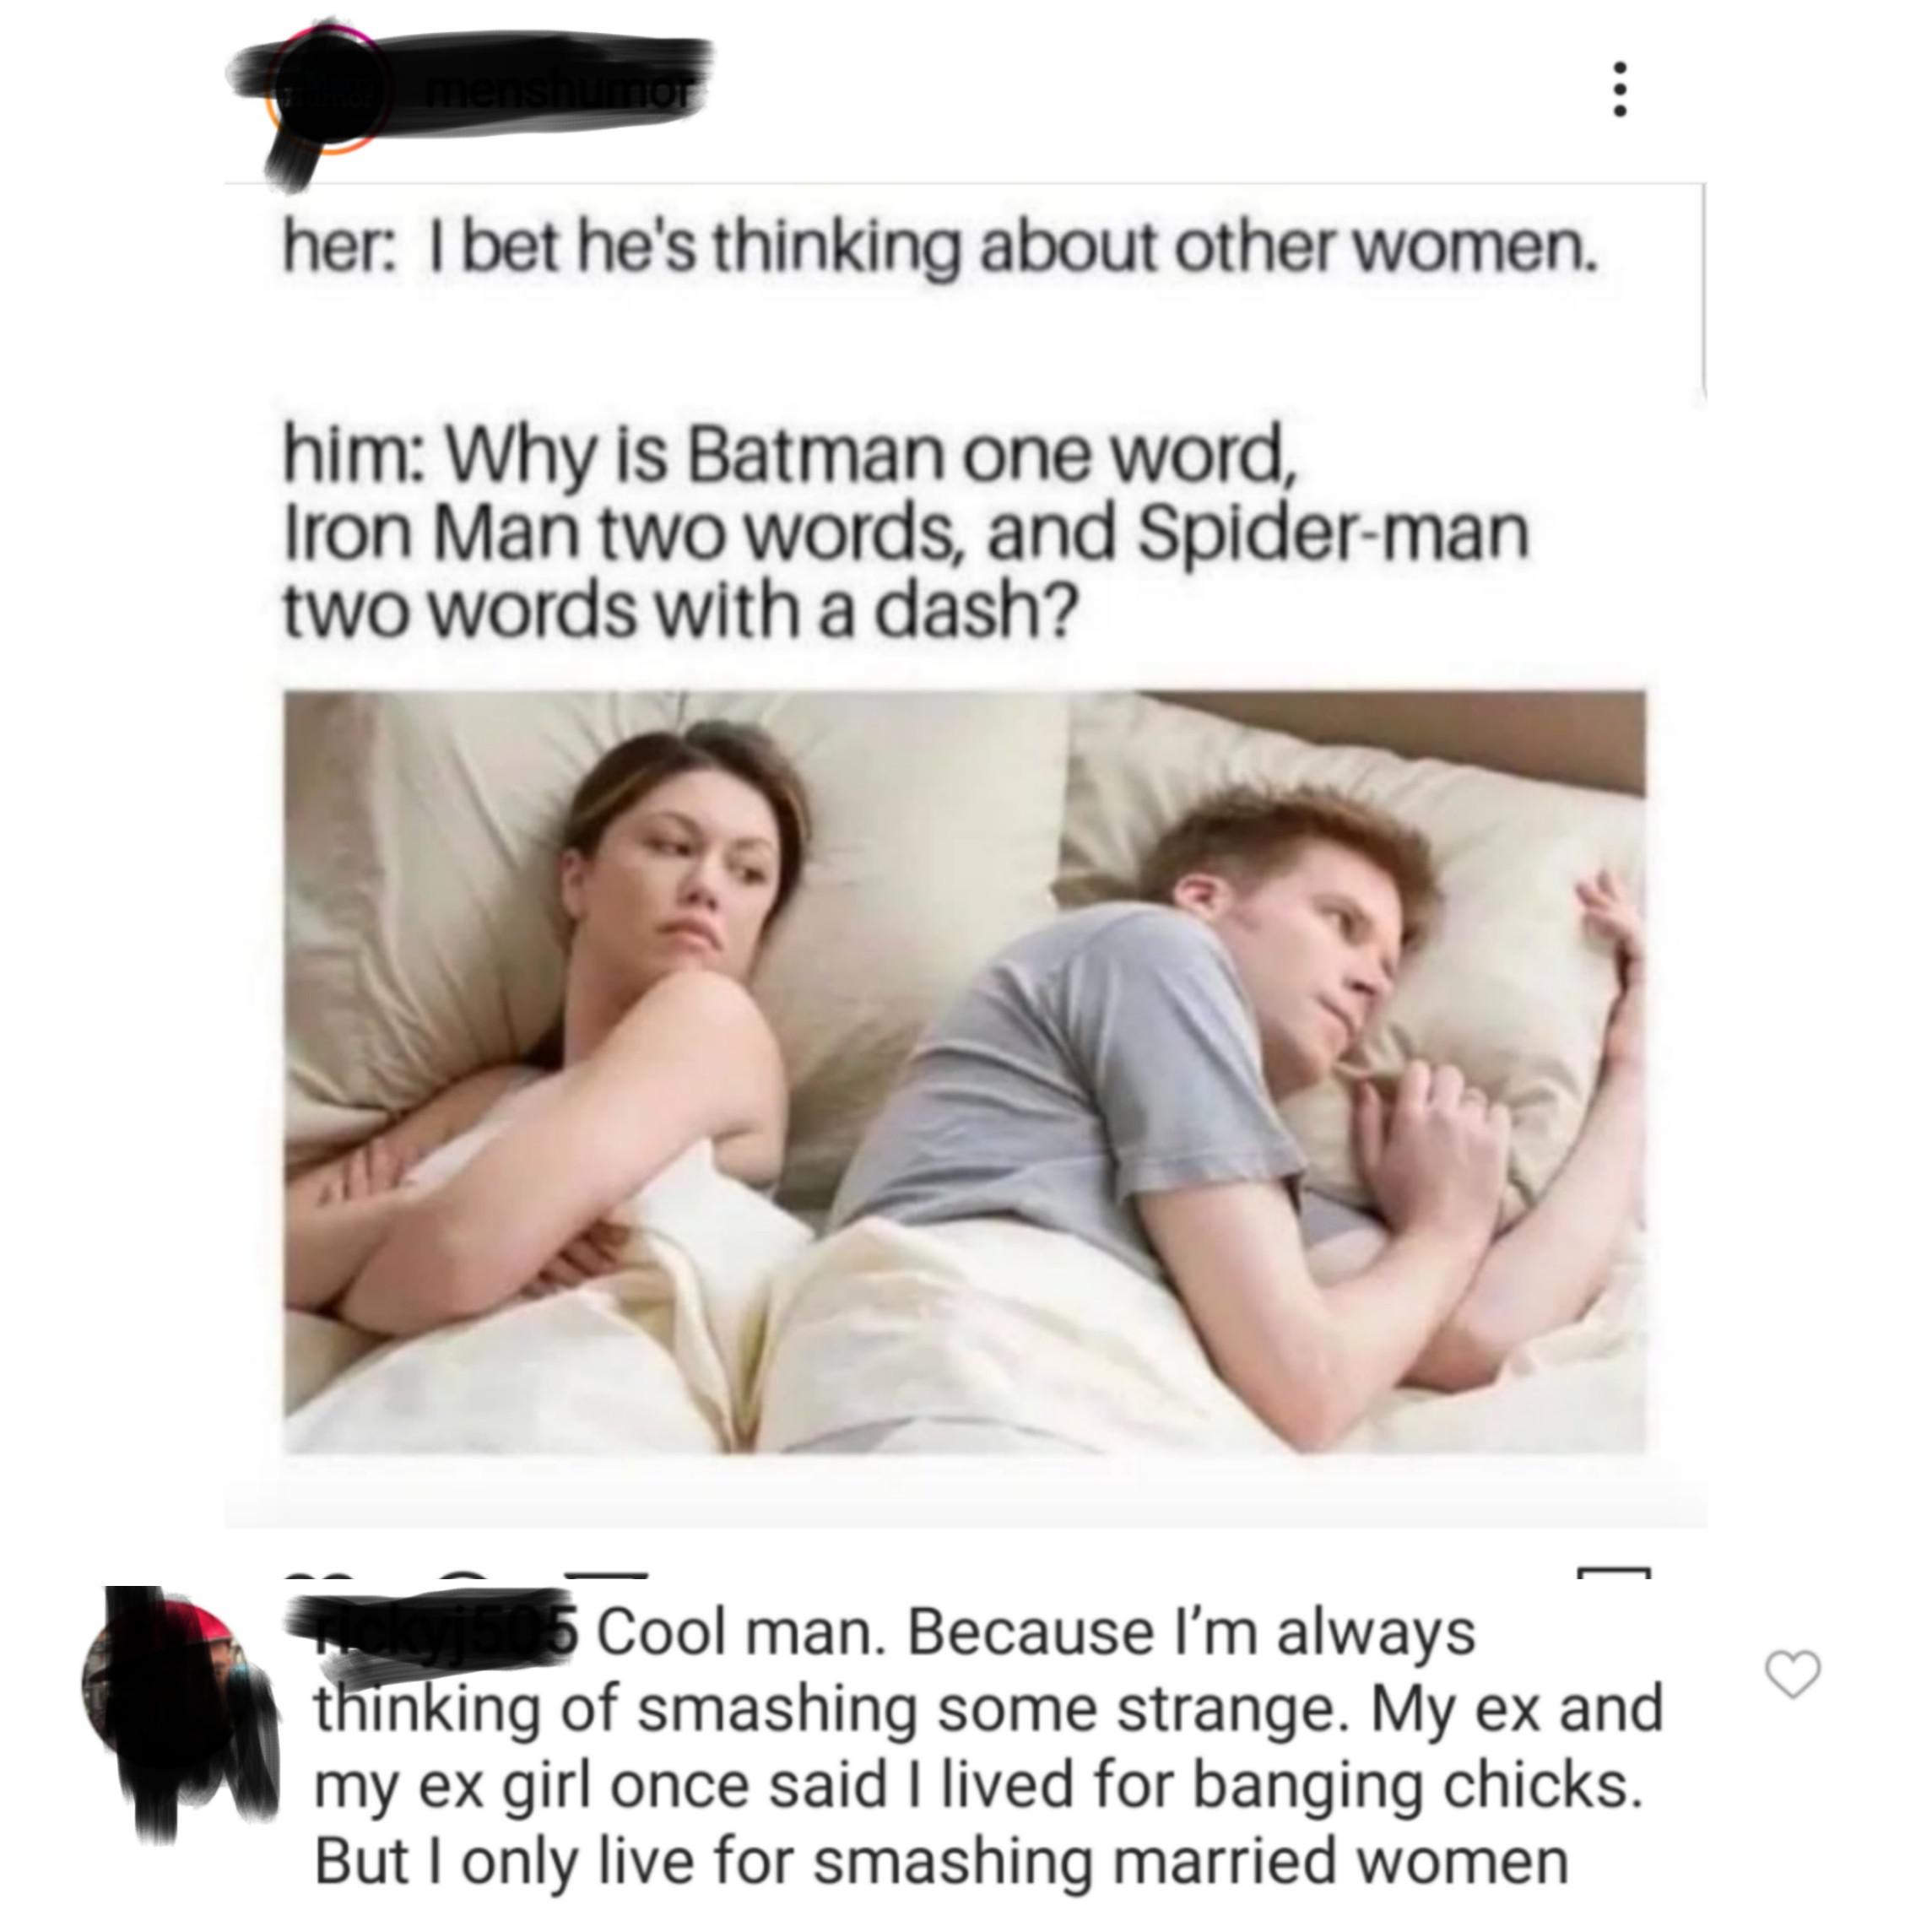 he must be thinking of other women meme - her I bet he's thinking about other women. him Why is Batman one word, Iron Man two words, and Spiderman two words with a dash? 5 Cool man. Because I'm always thinking of smashing some strange. My ex and my ex gir